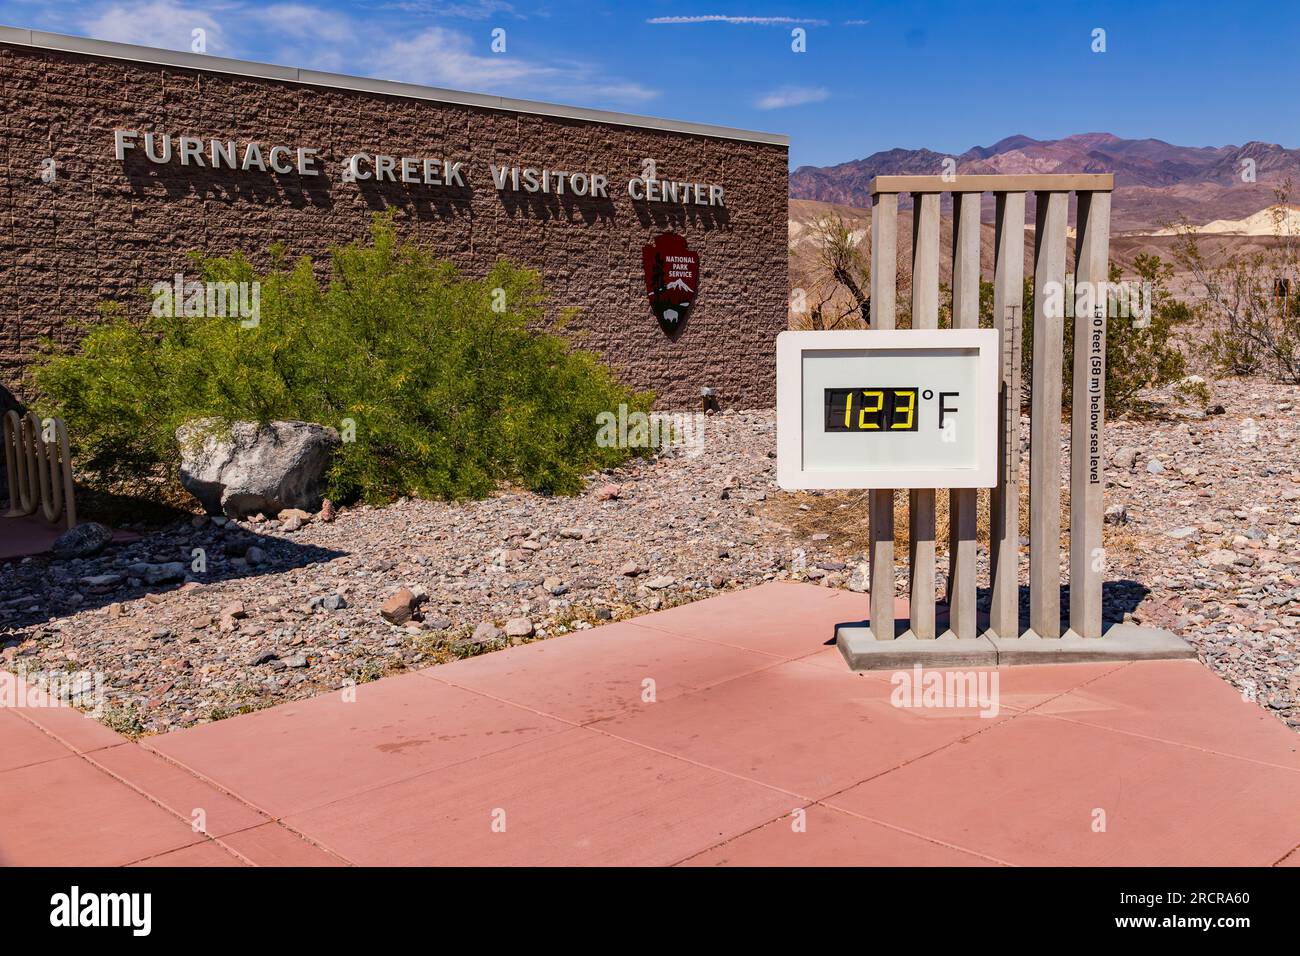 Extreme heat and heat record with 123 degrees Fahrenheit at the thermometer at Furnace Creek Visitor Center in Death Valley, United States Stock Photo